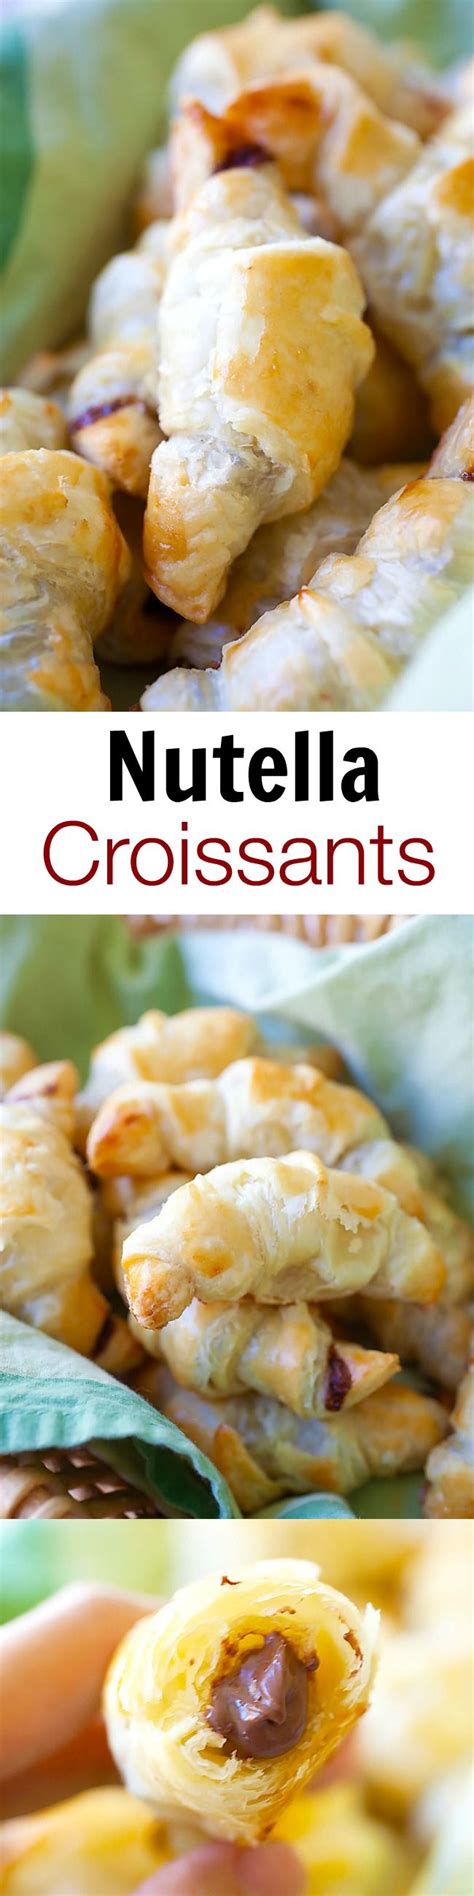 Nutella Croissants 3 Ingredients Recipe Loaded With Rich Creamy